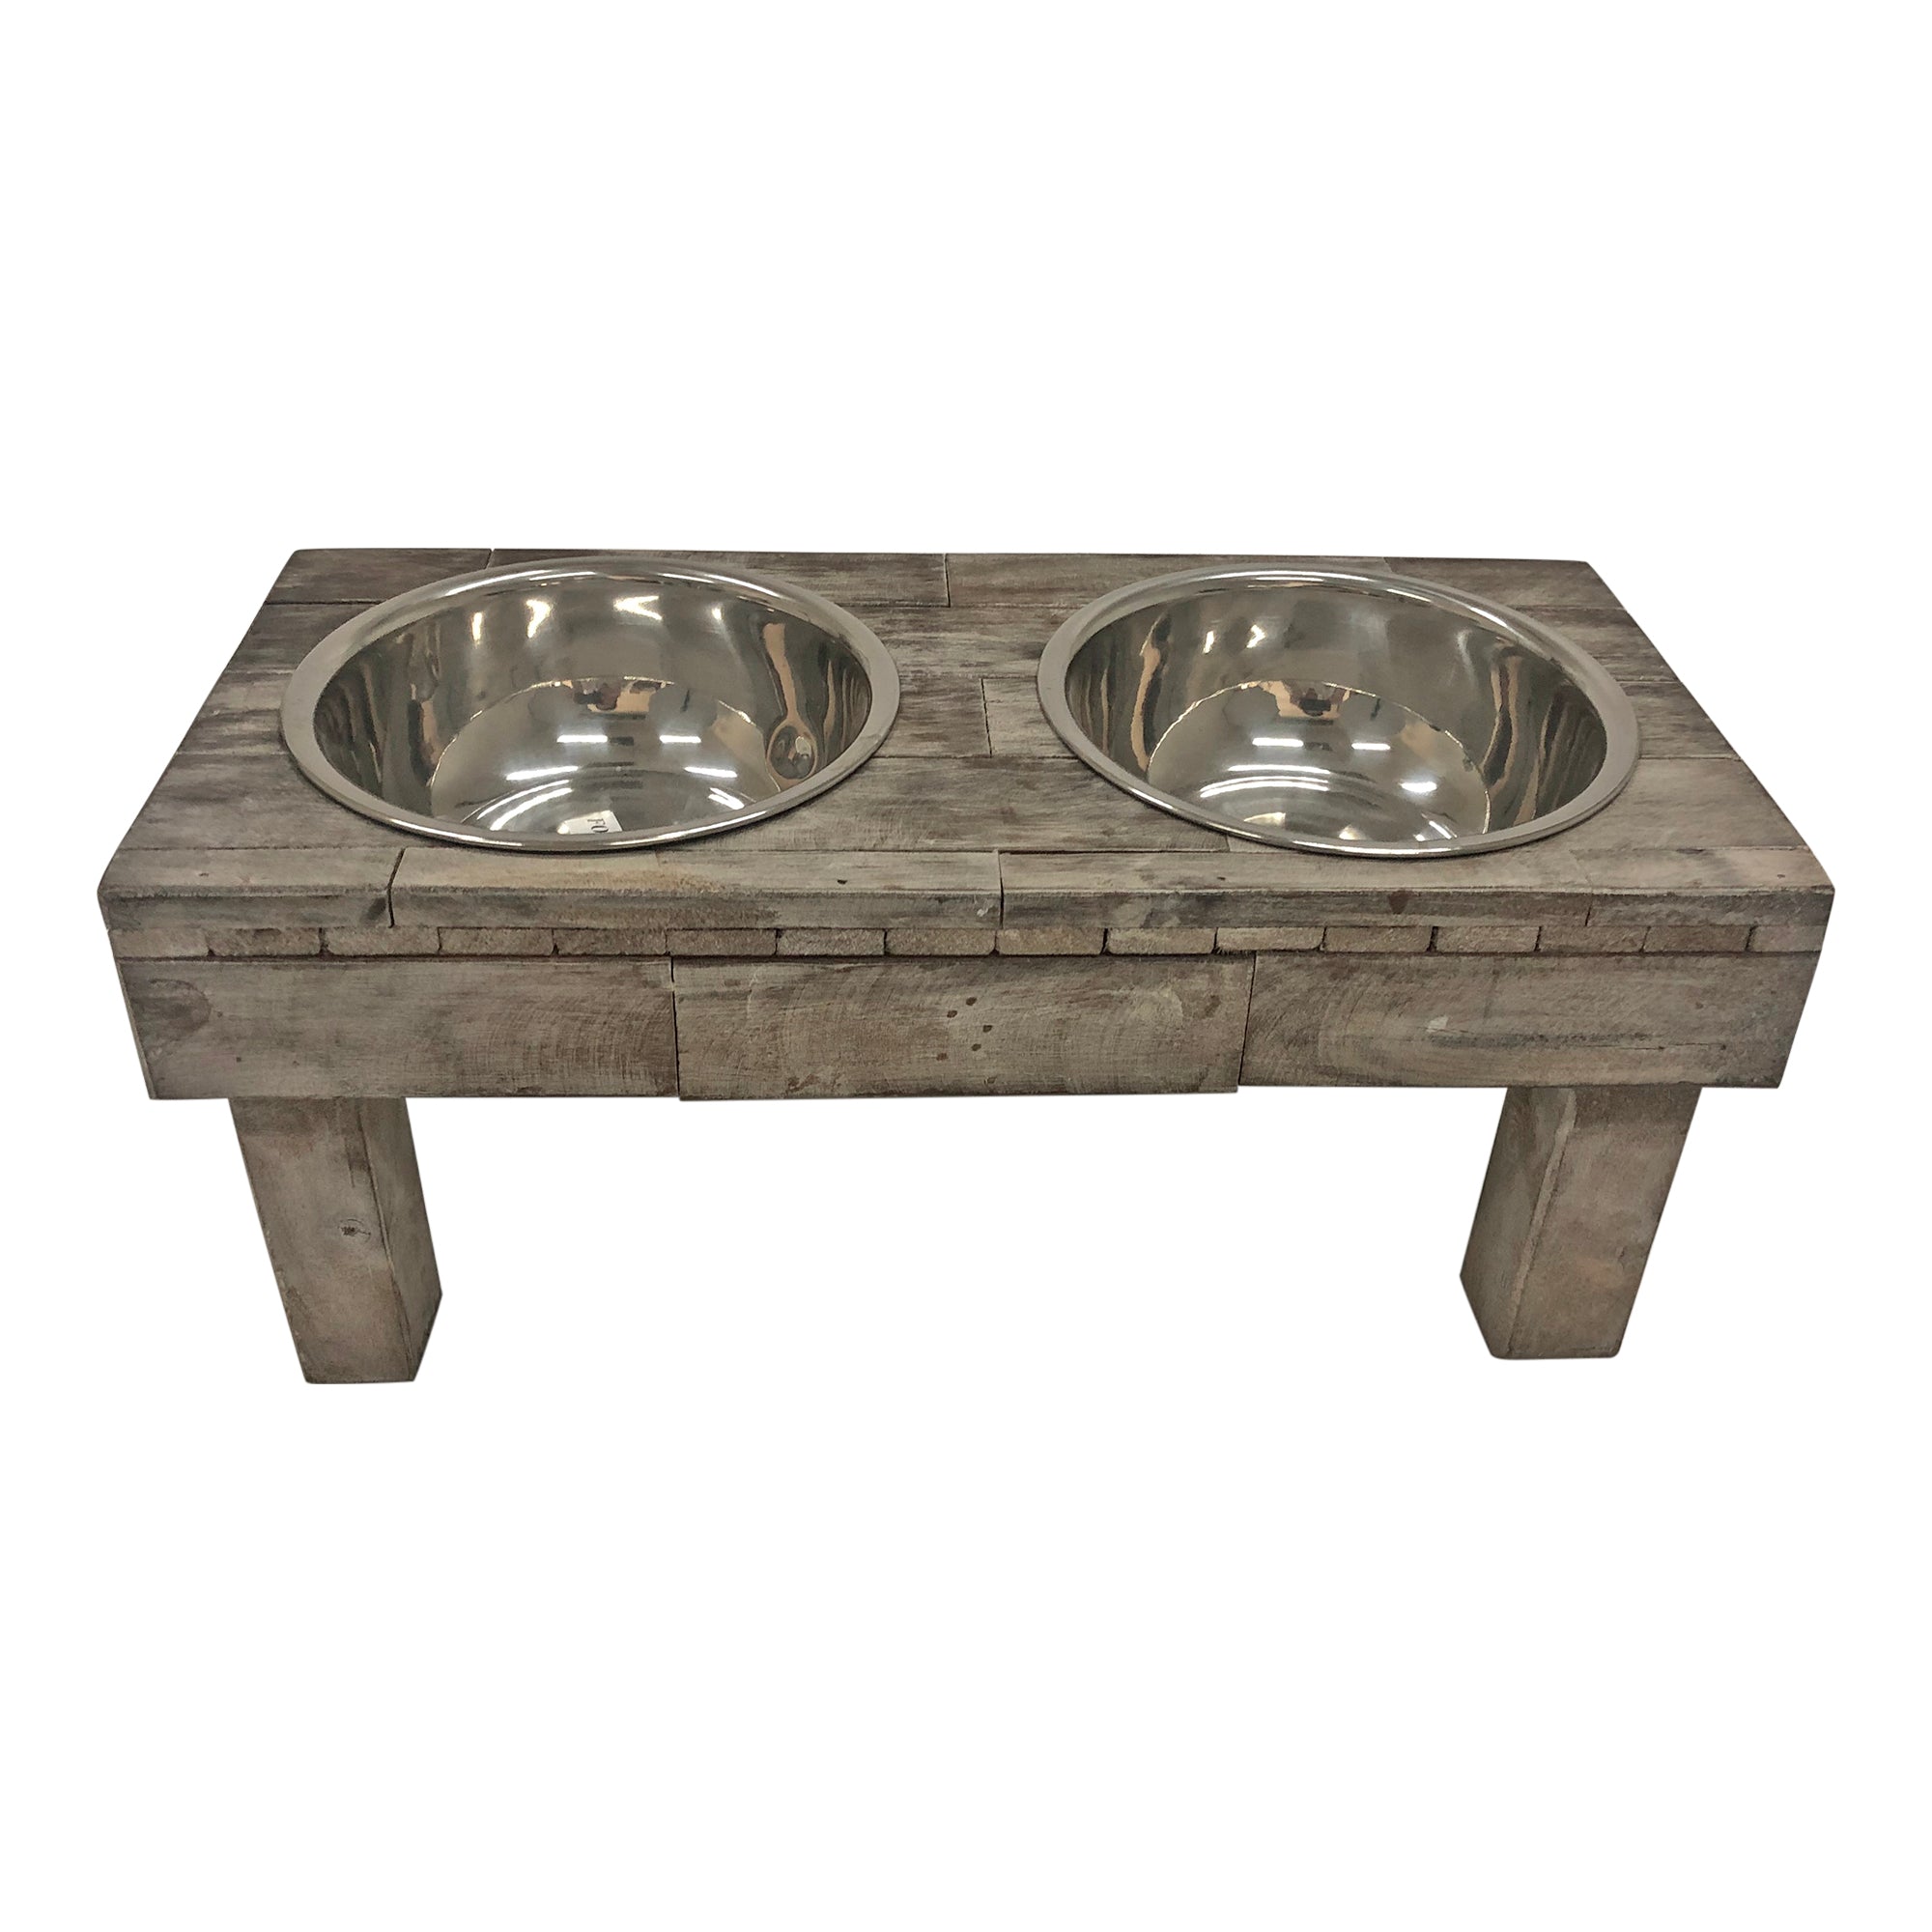 Elevated Dog Bowls - Decorative 6.5-inch-Tall Stand for Dogs and